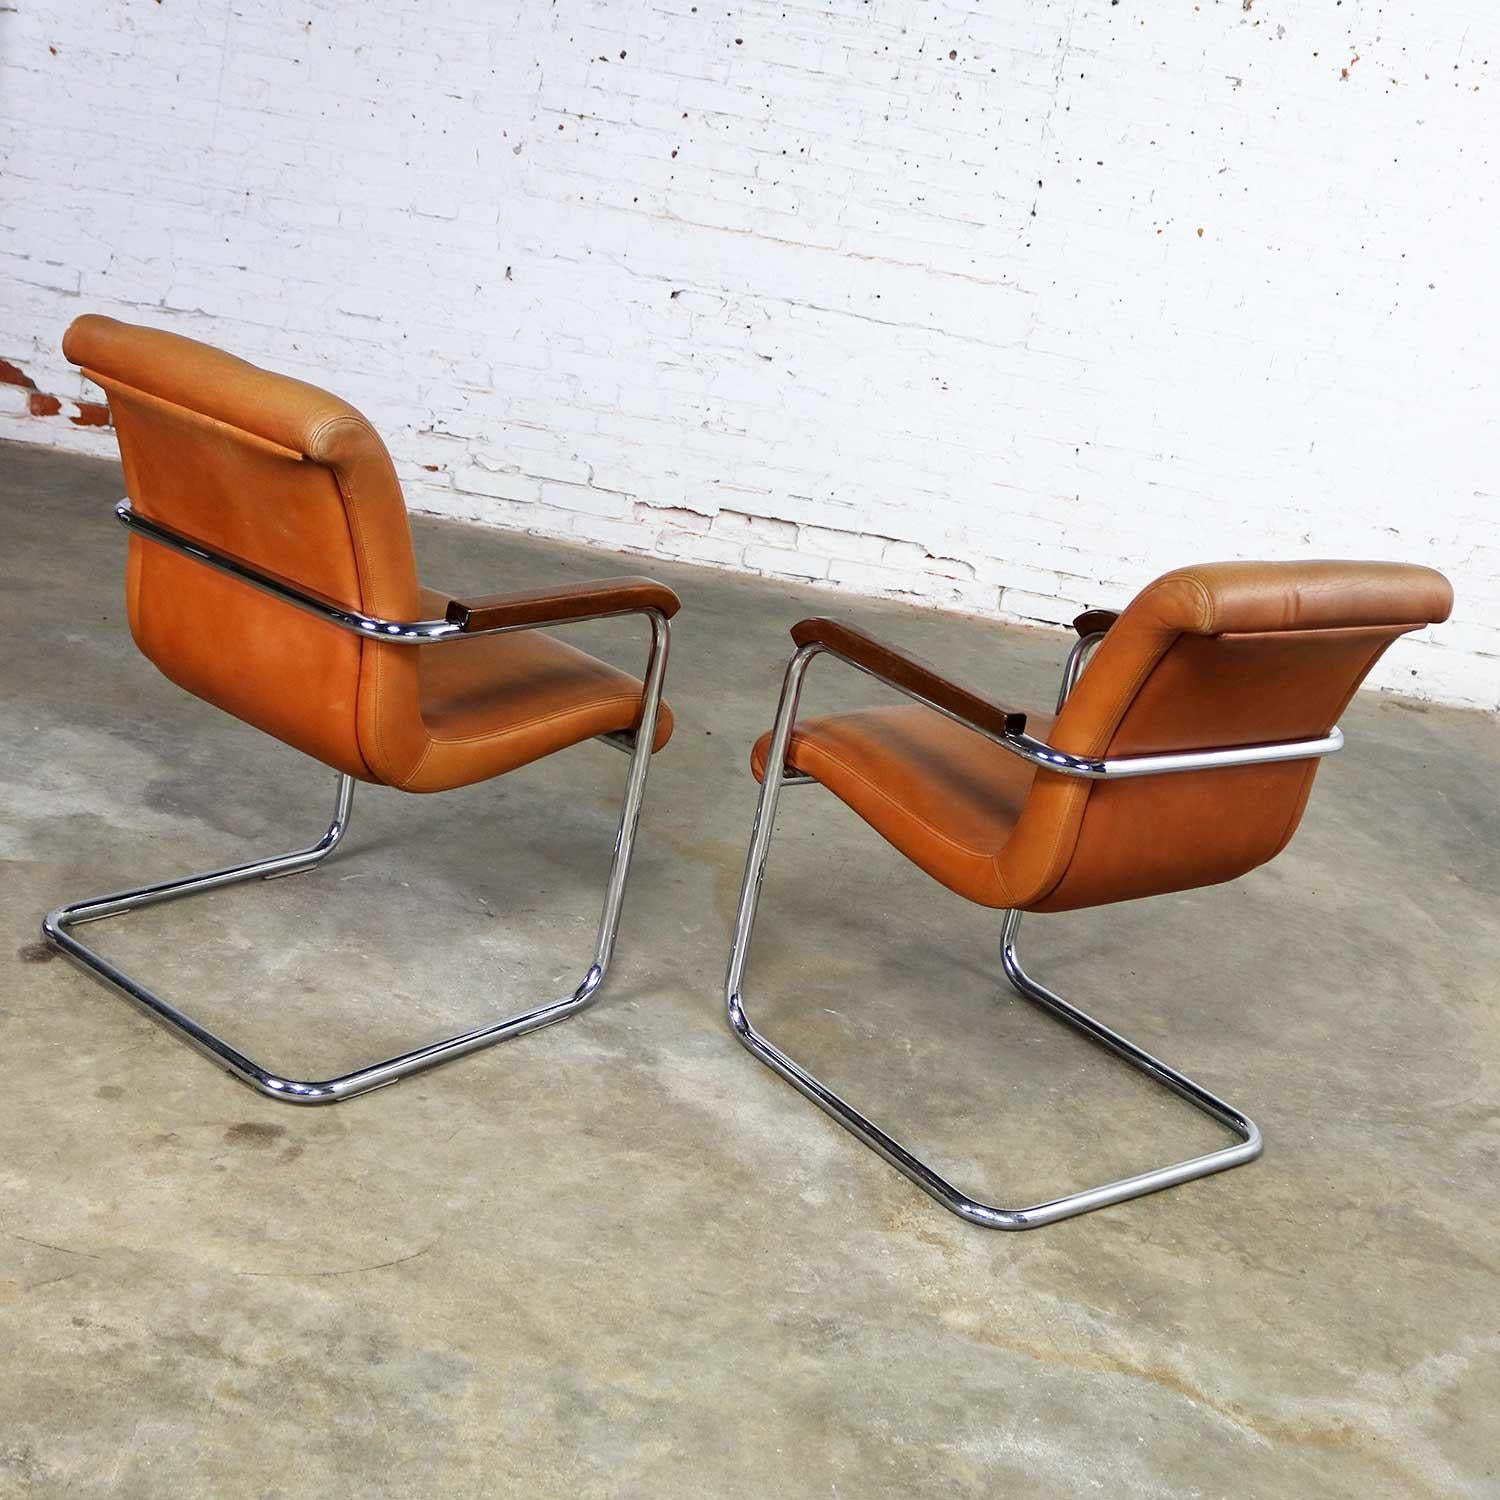 Cantilevered Chrome Cognac Leather Chairs Mid-Century Modern 2